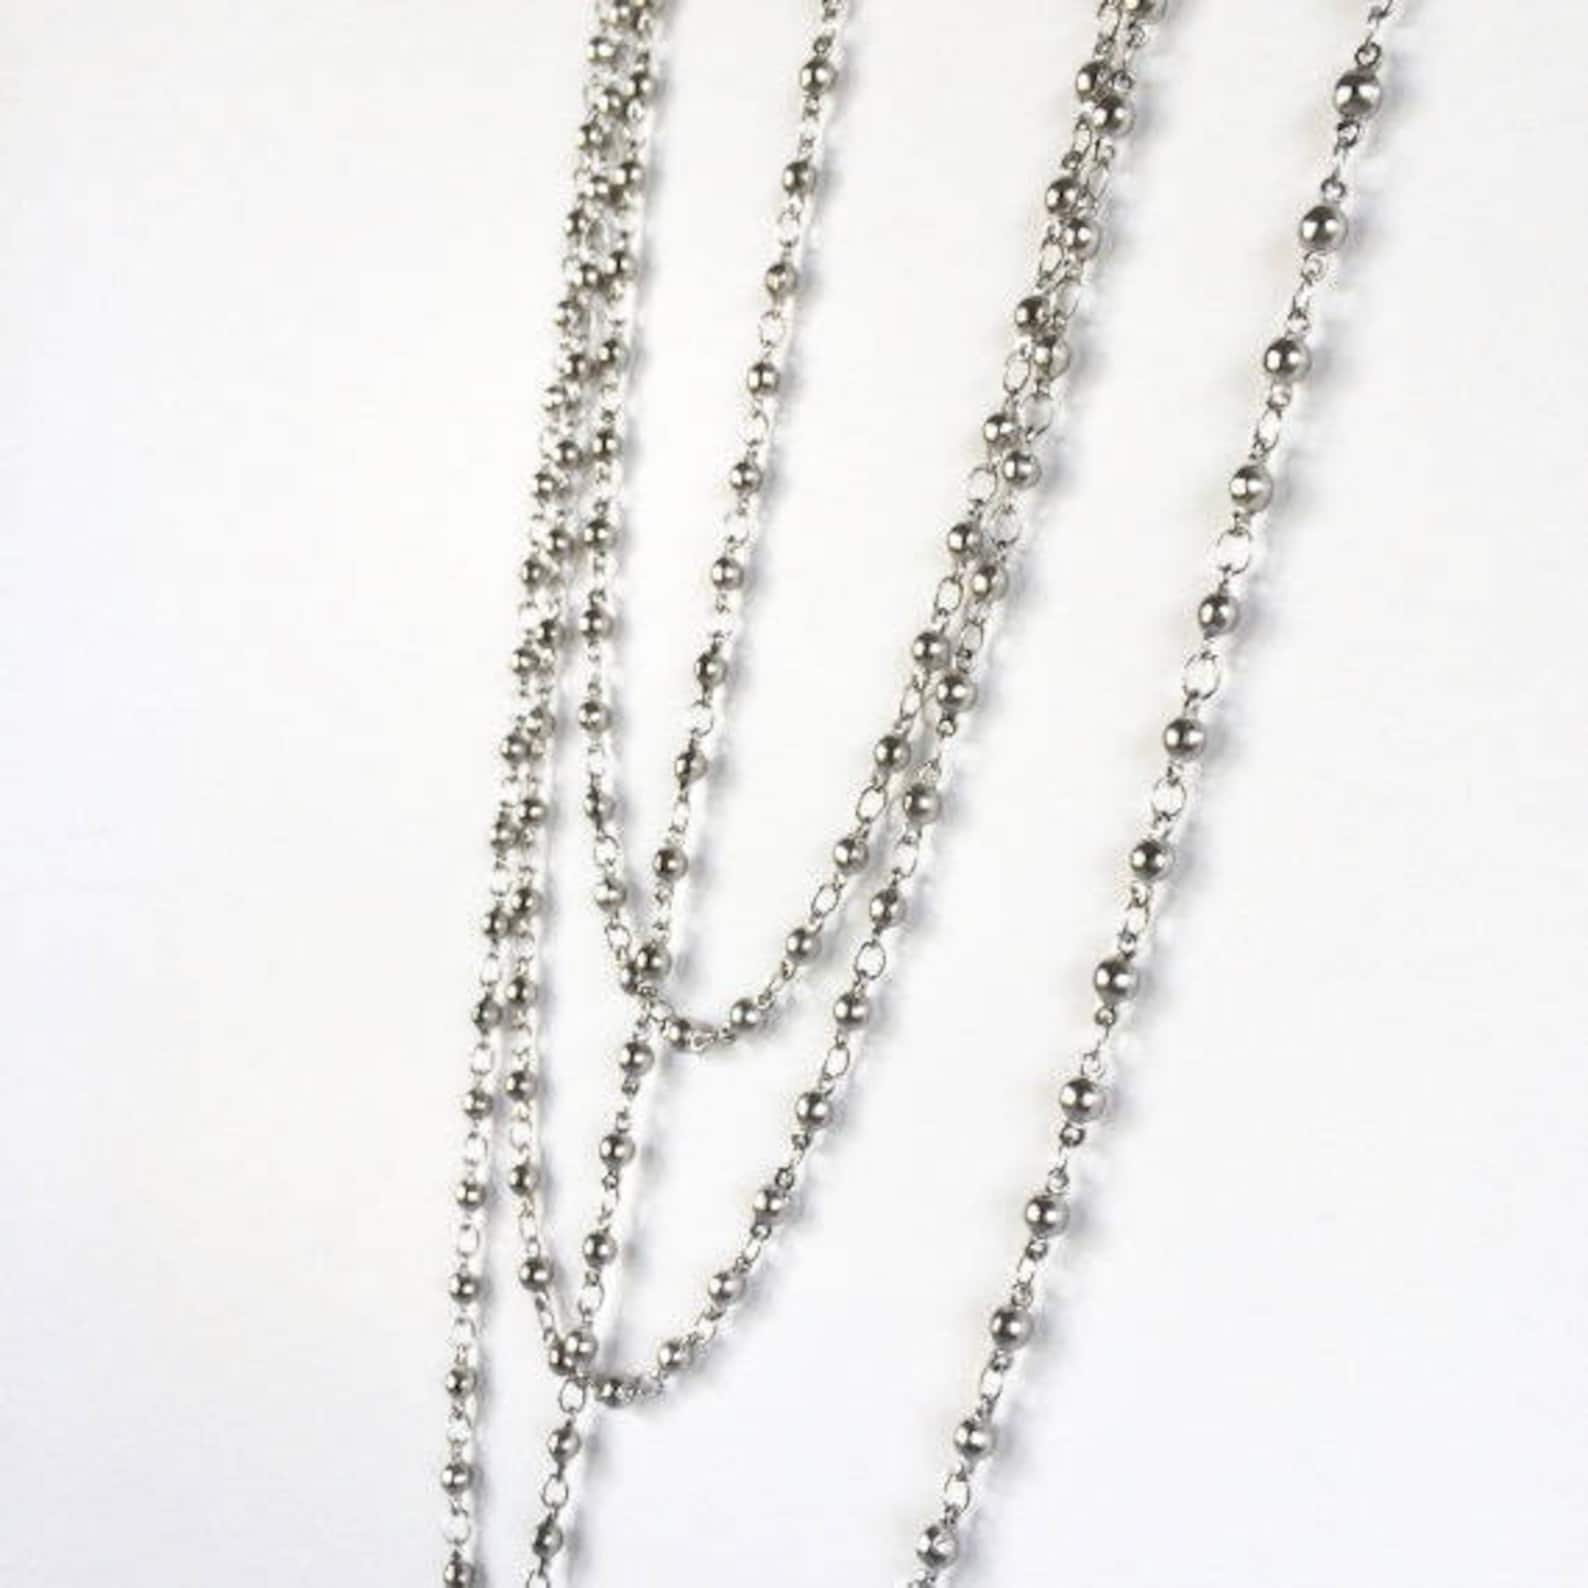 Silver Bead Chain Silver Rosary Chain 3mm Bead Chain 2FT - Etsy